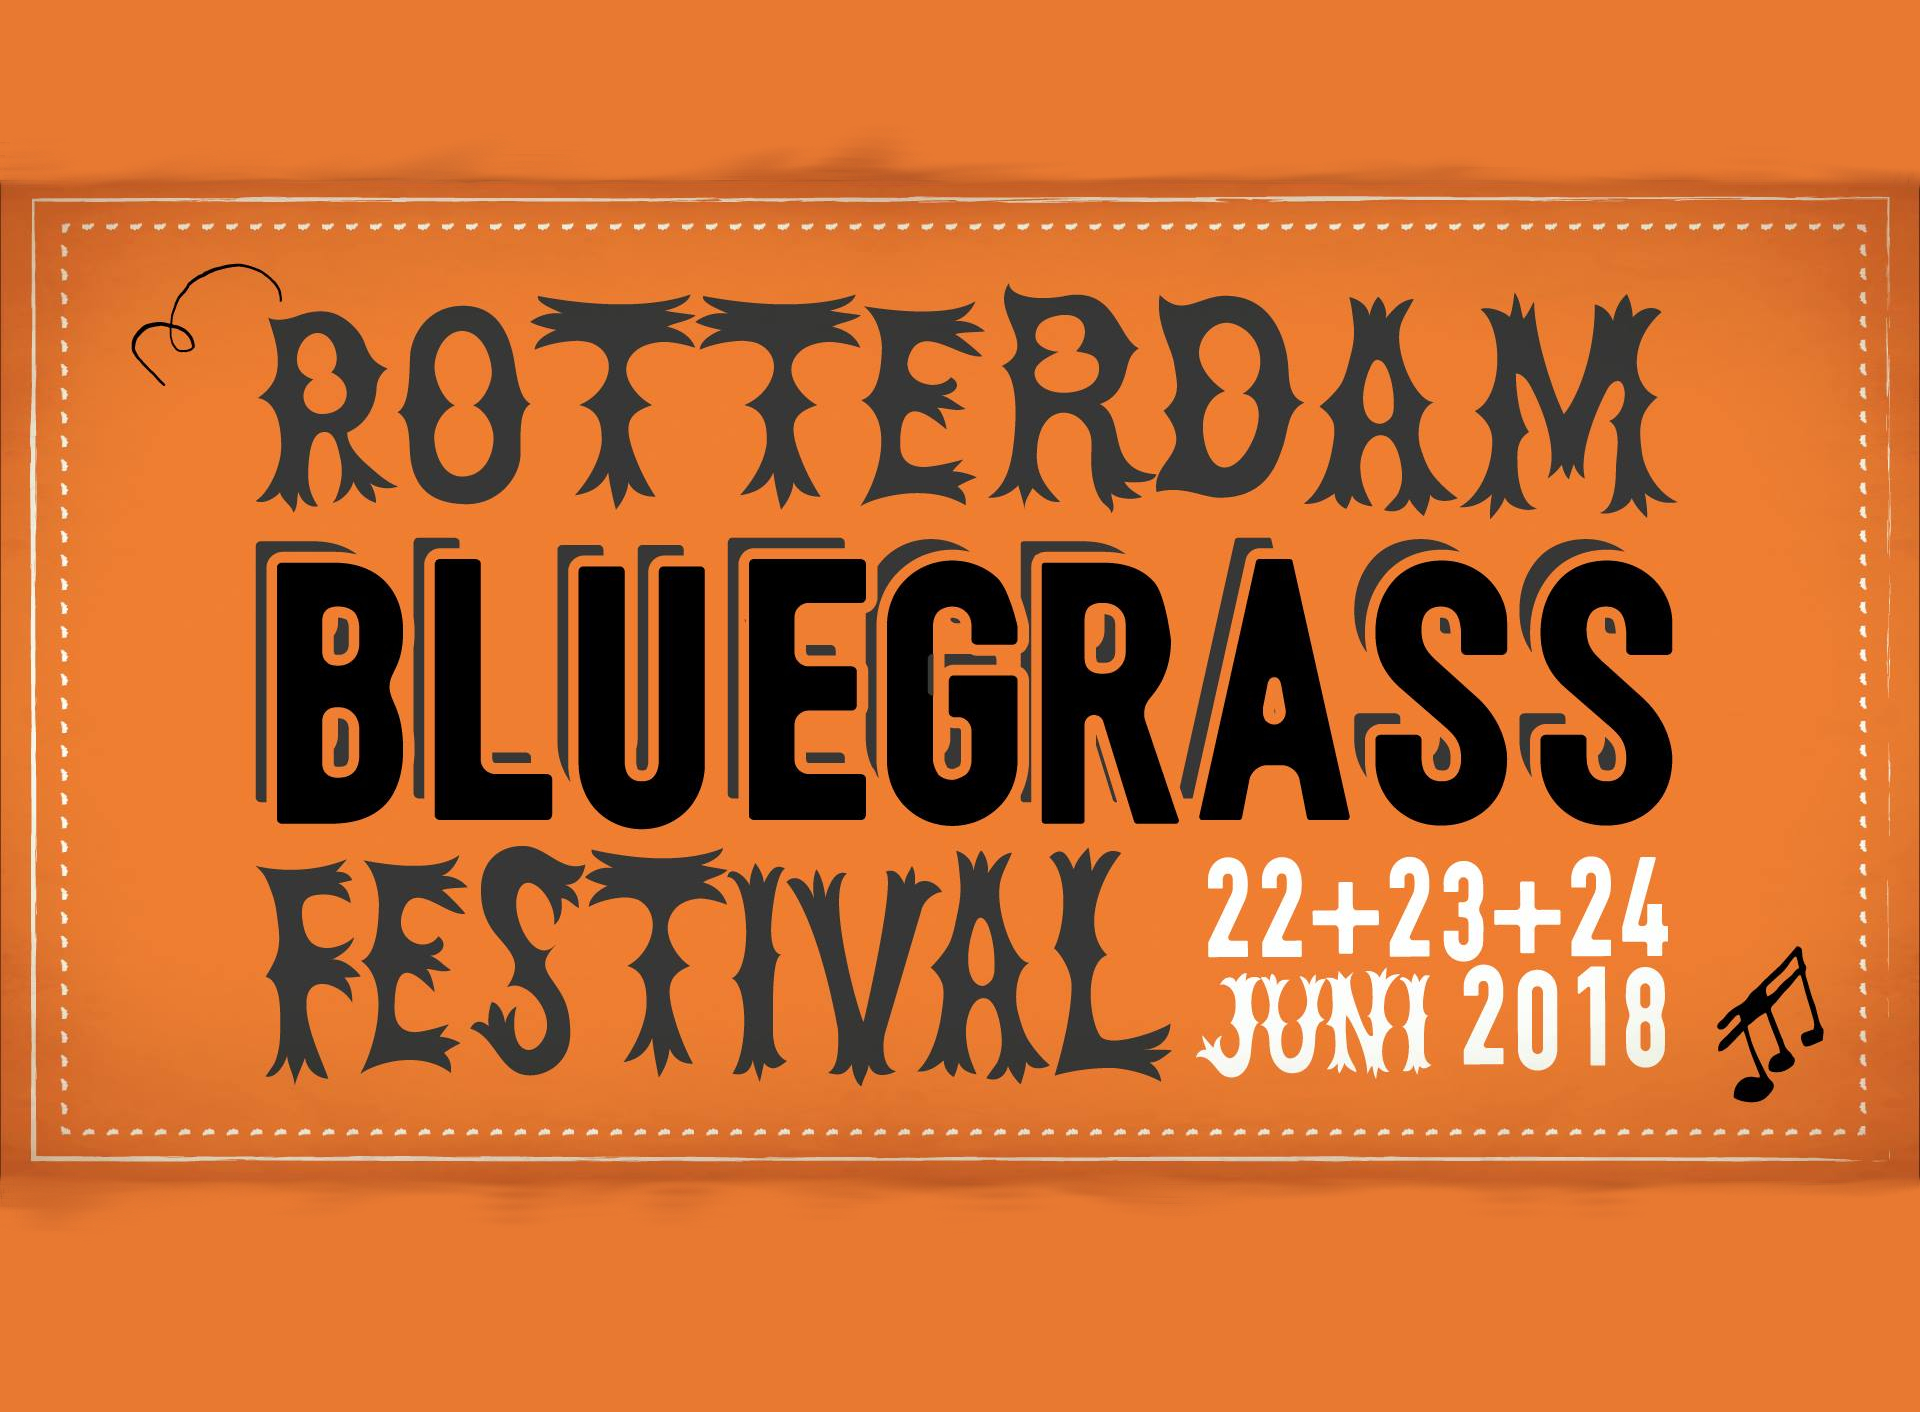 This weekend it's time for Rotterdam Bluegrass Festival